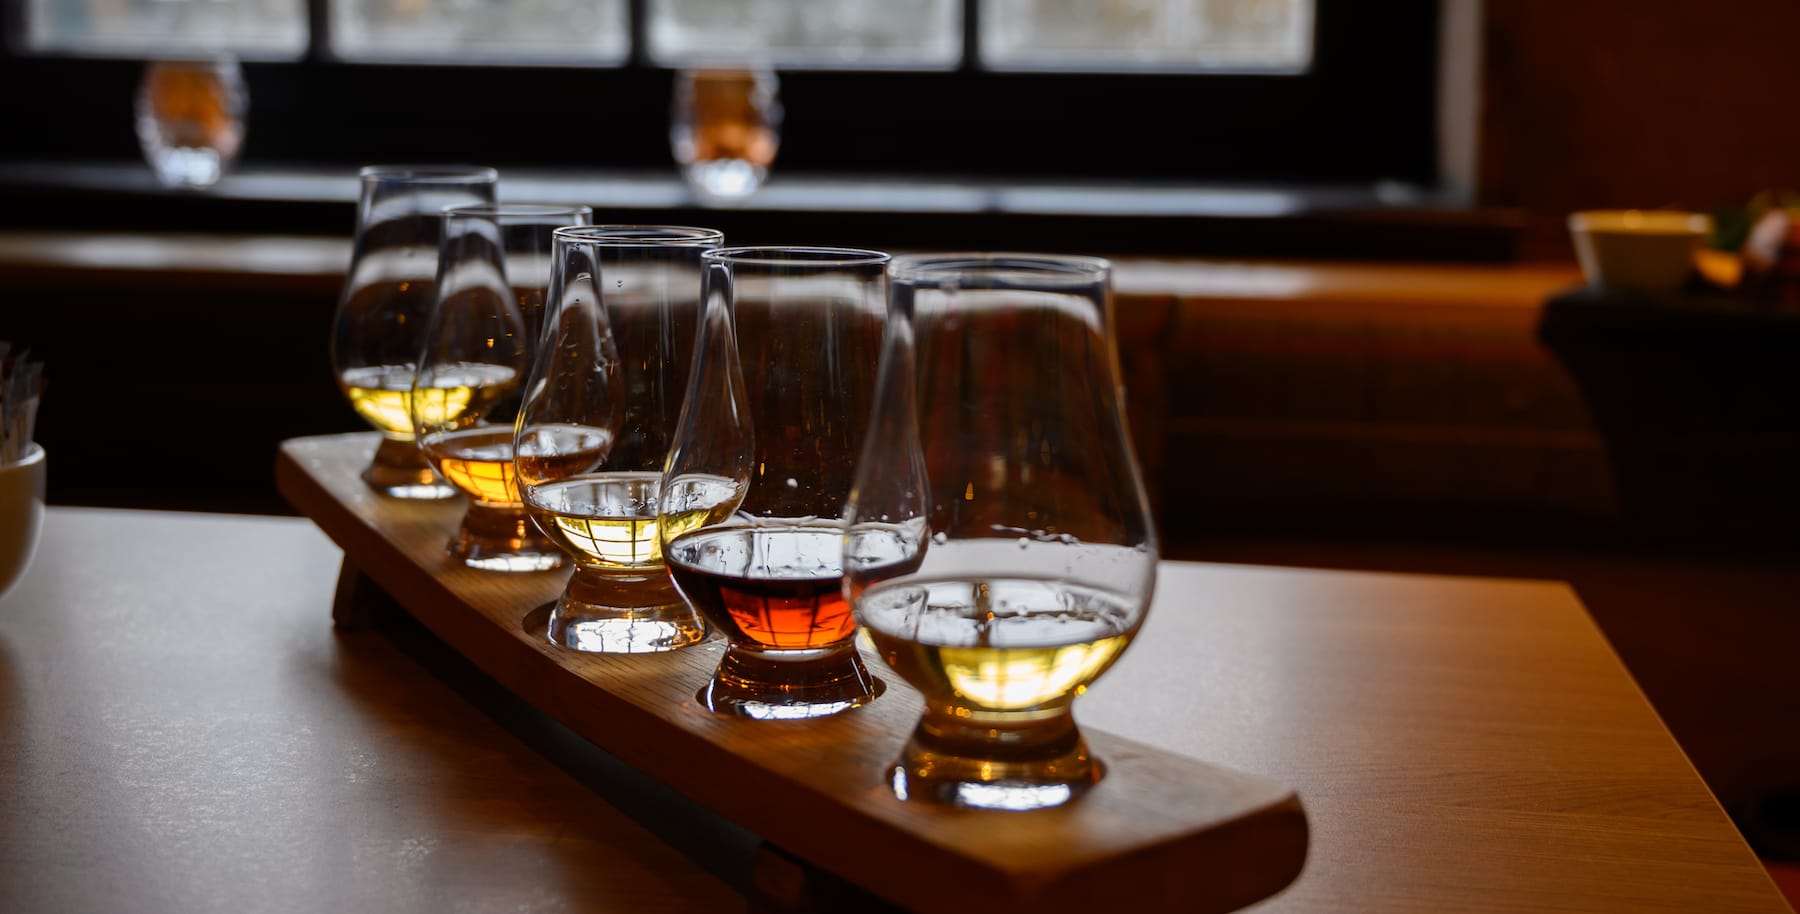 Whisky or whiskey: who put the 'e' in?